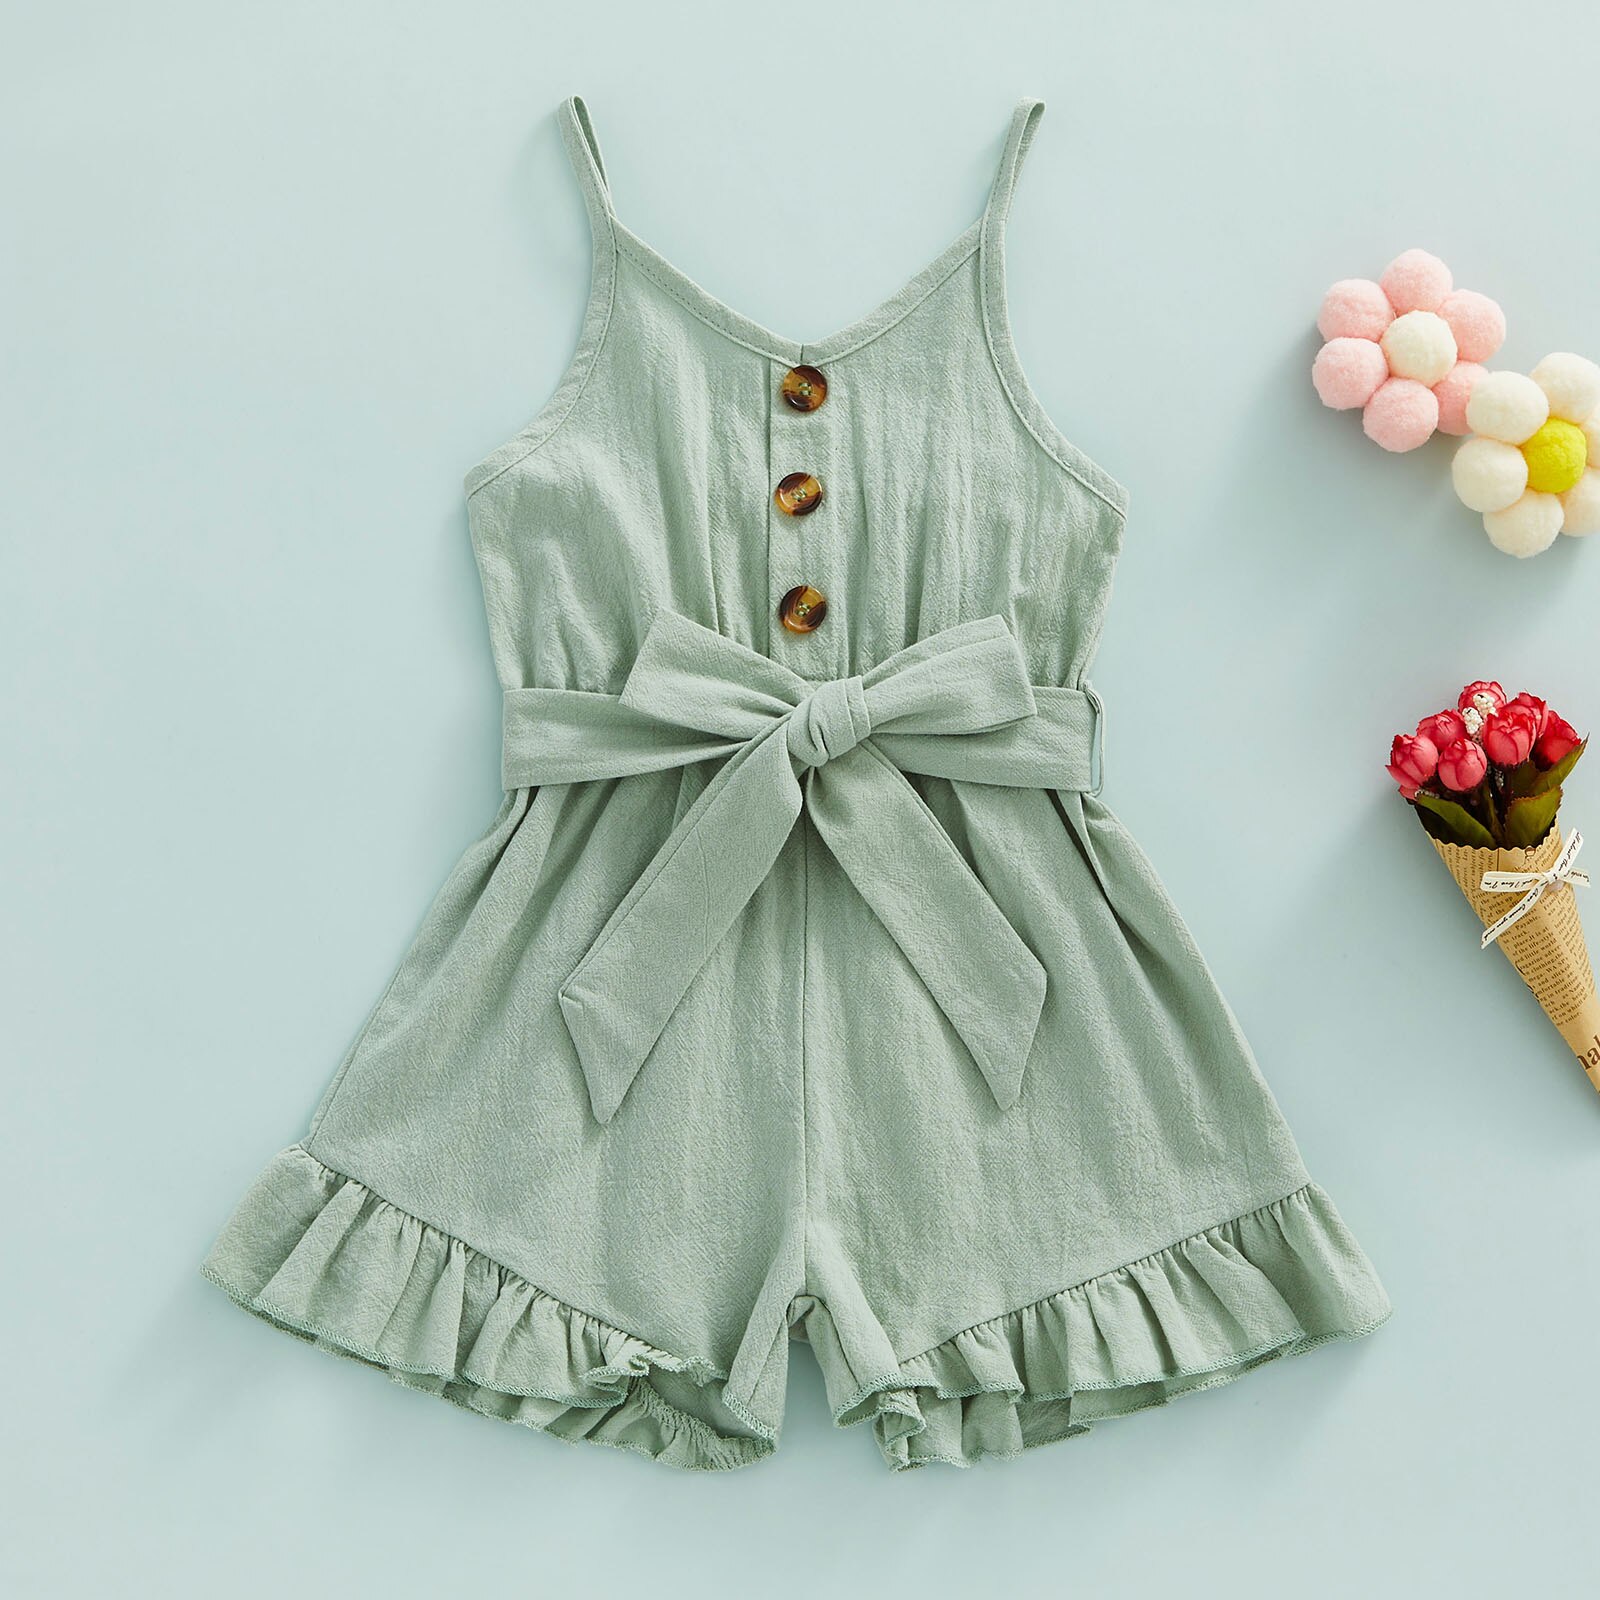 Toddler-Kid-Baby-Girls-Sling-Playsuit-Spaghetti-Straps-V-Neck-Buttons-Sleeveless-Ruffle-Hem-Solid-Color-5